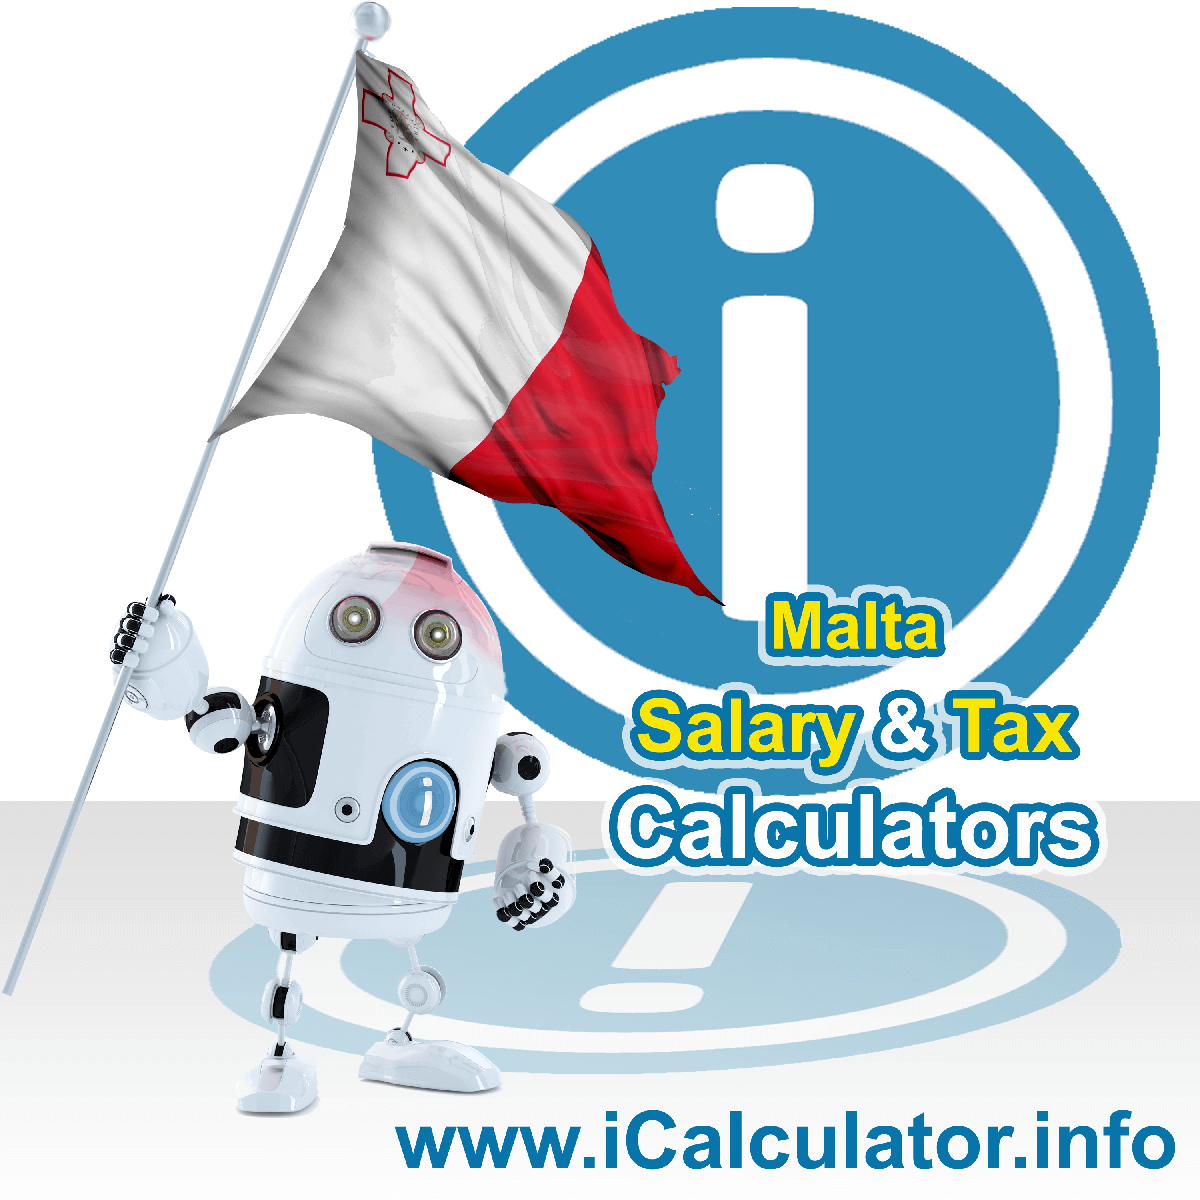 Malta Salary Calculator. This image shows the Maltaese flag and information relating to the tax formula for the Malta Tax Calculator